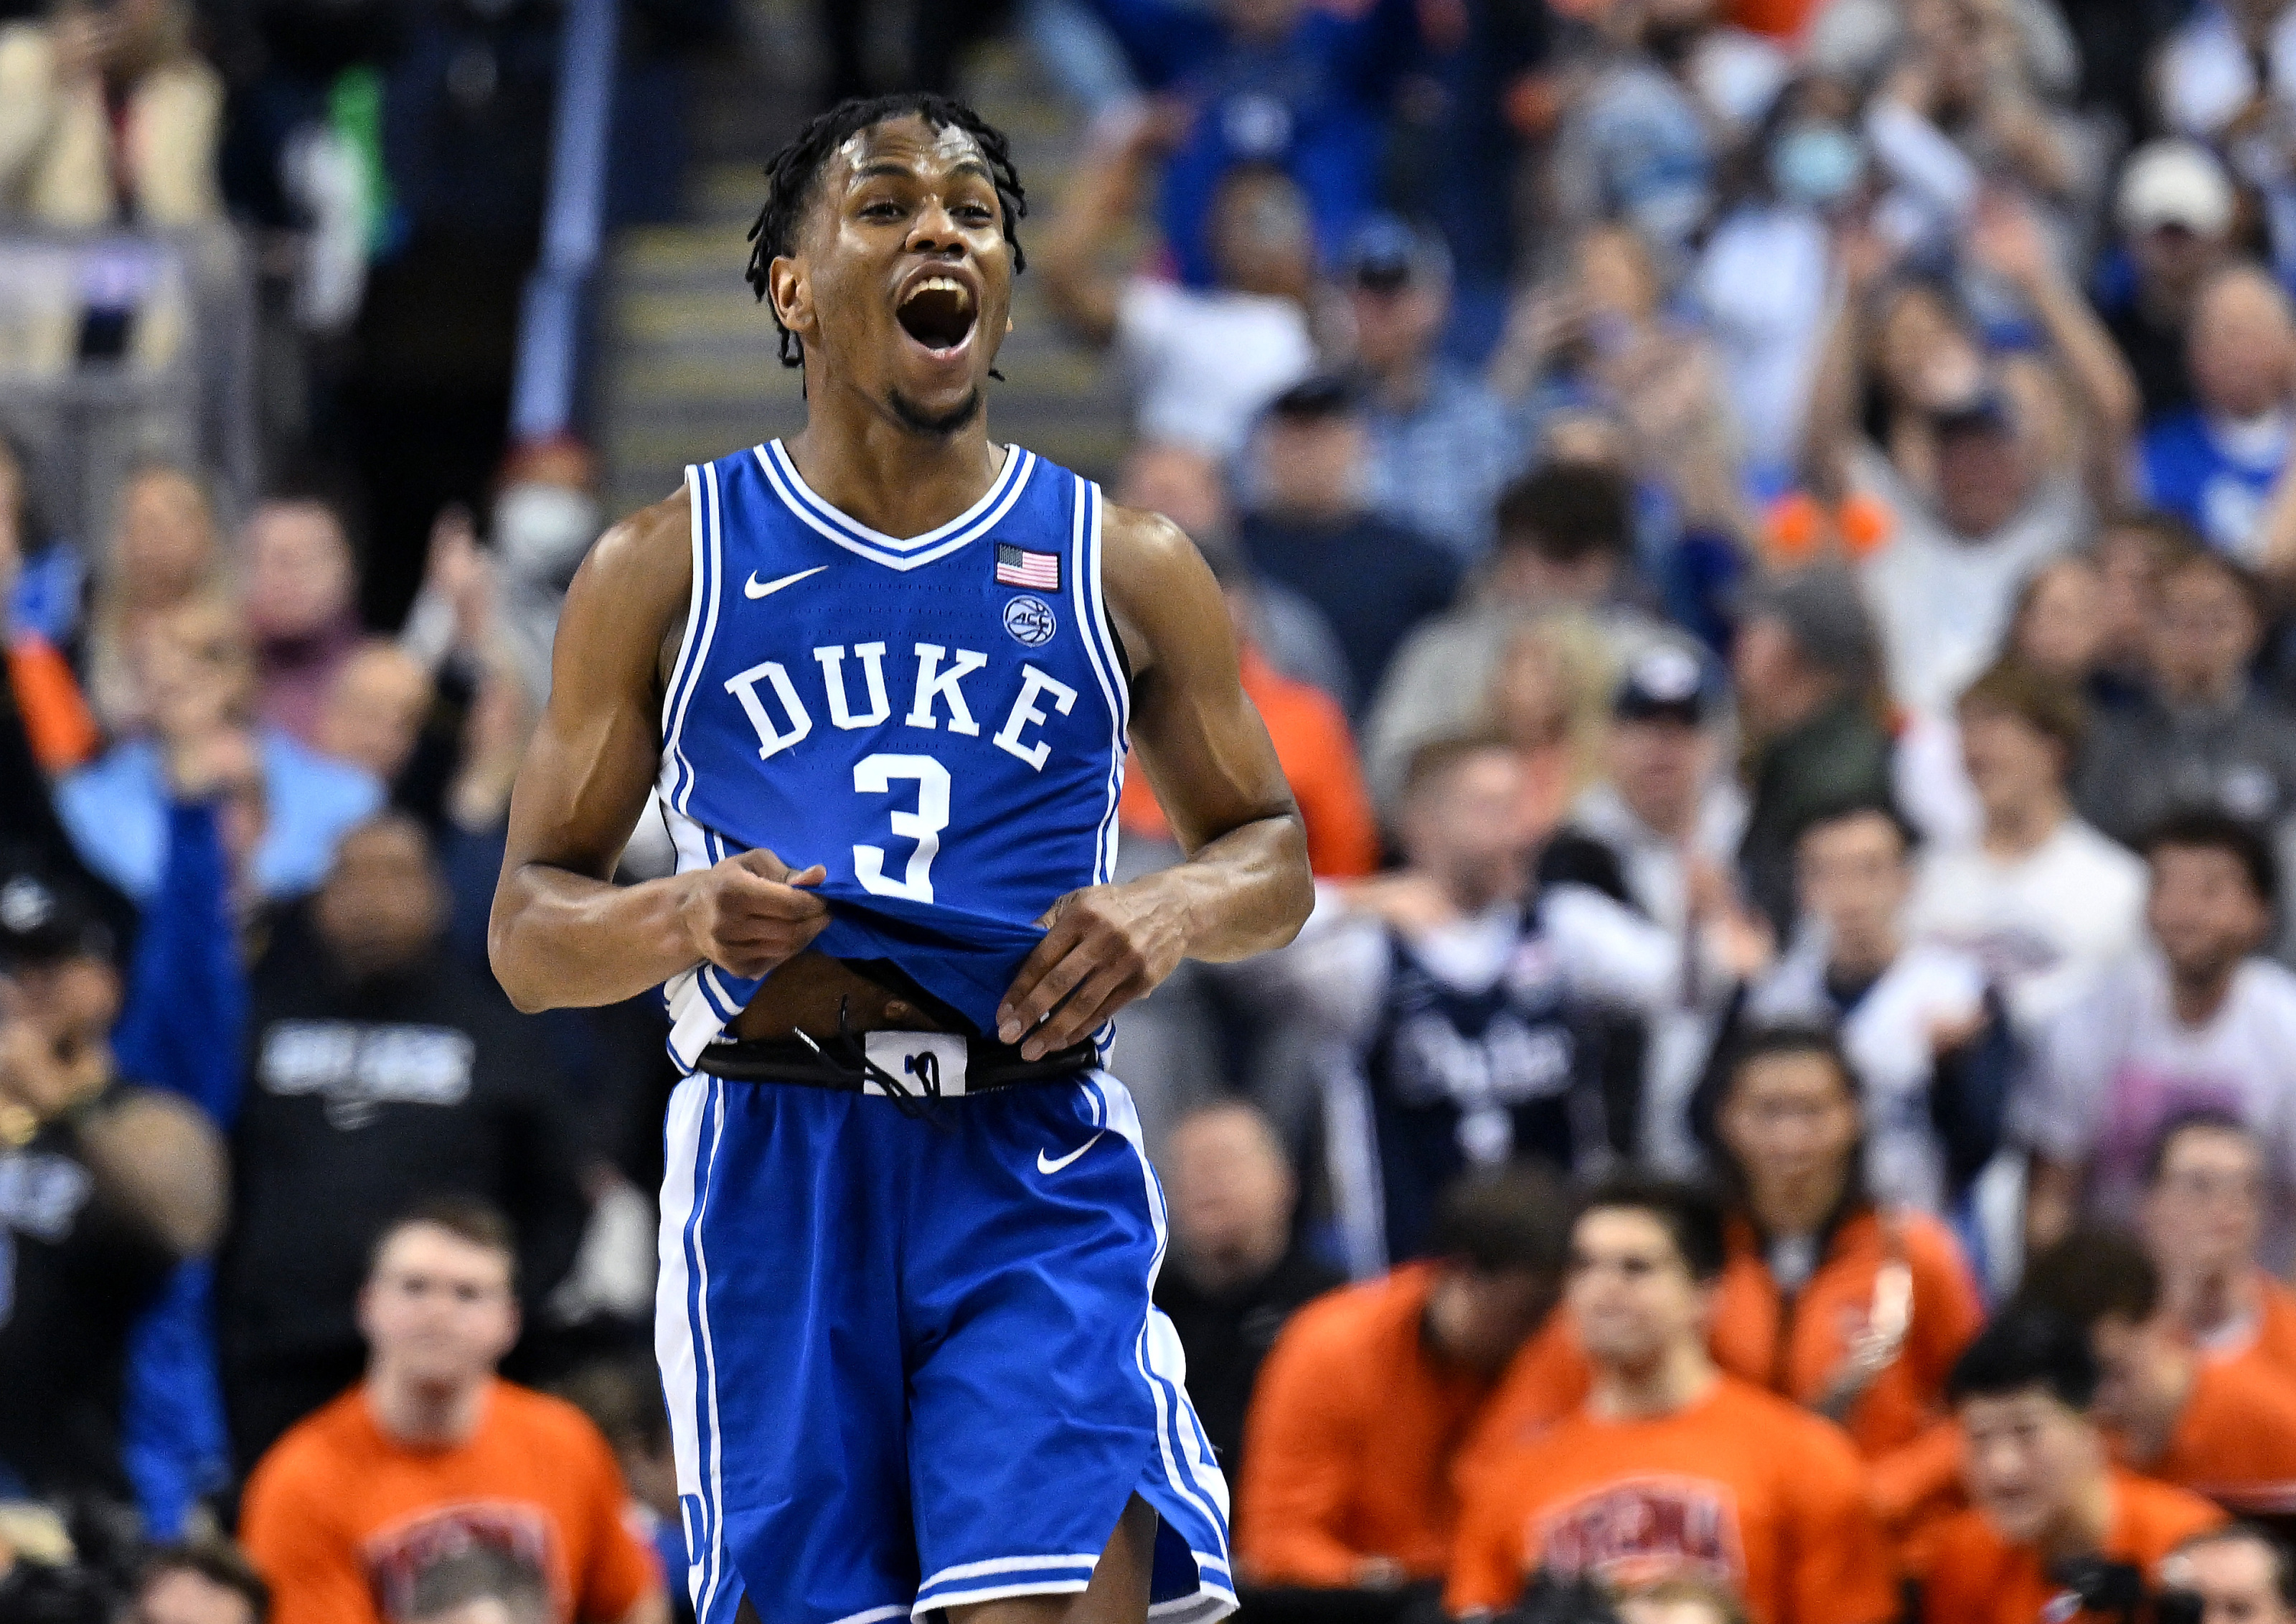 March Madness What channel is the Duke game on today? (and how to watch)